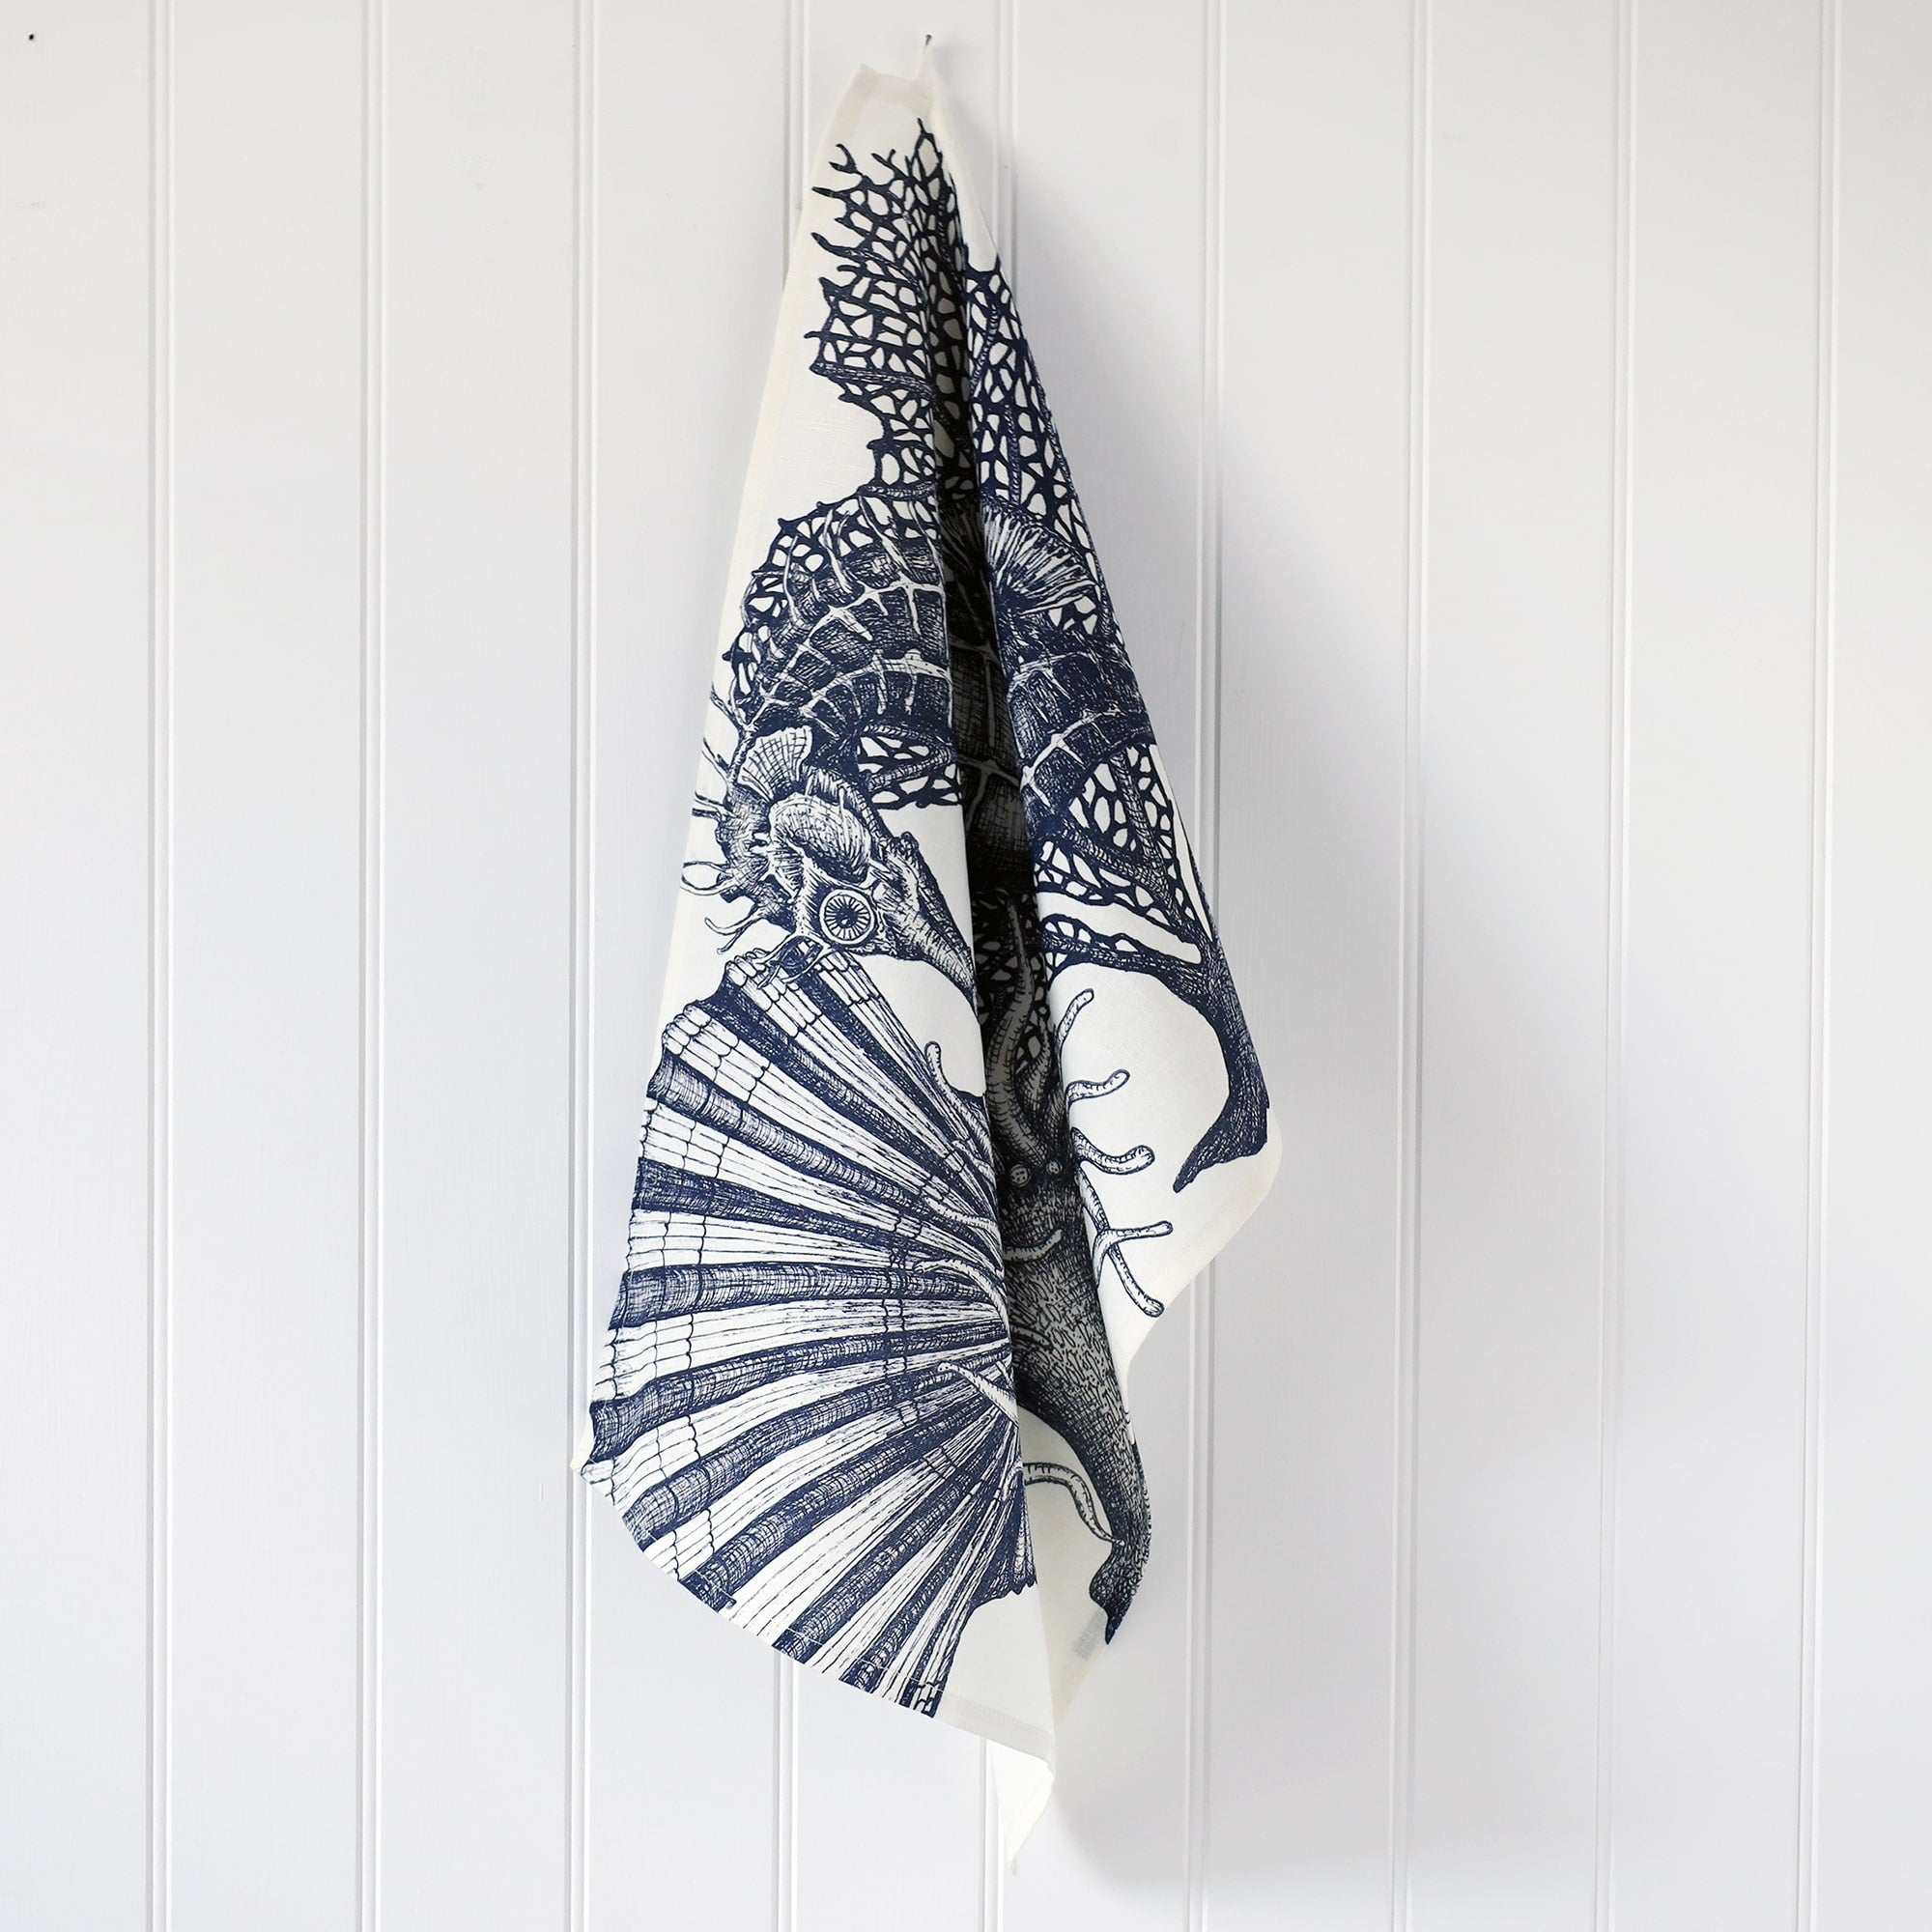 Cotton and Linen Seahorse Tea towel decorated with hand drawn design in shades of blue on a white background,hanging on a hook